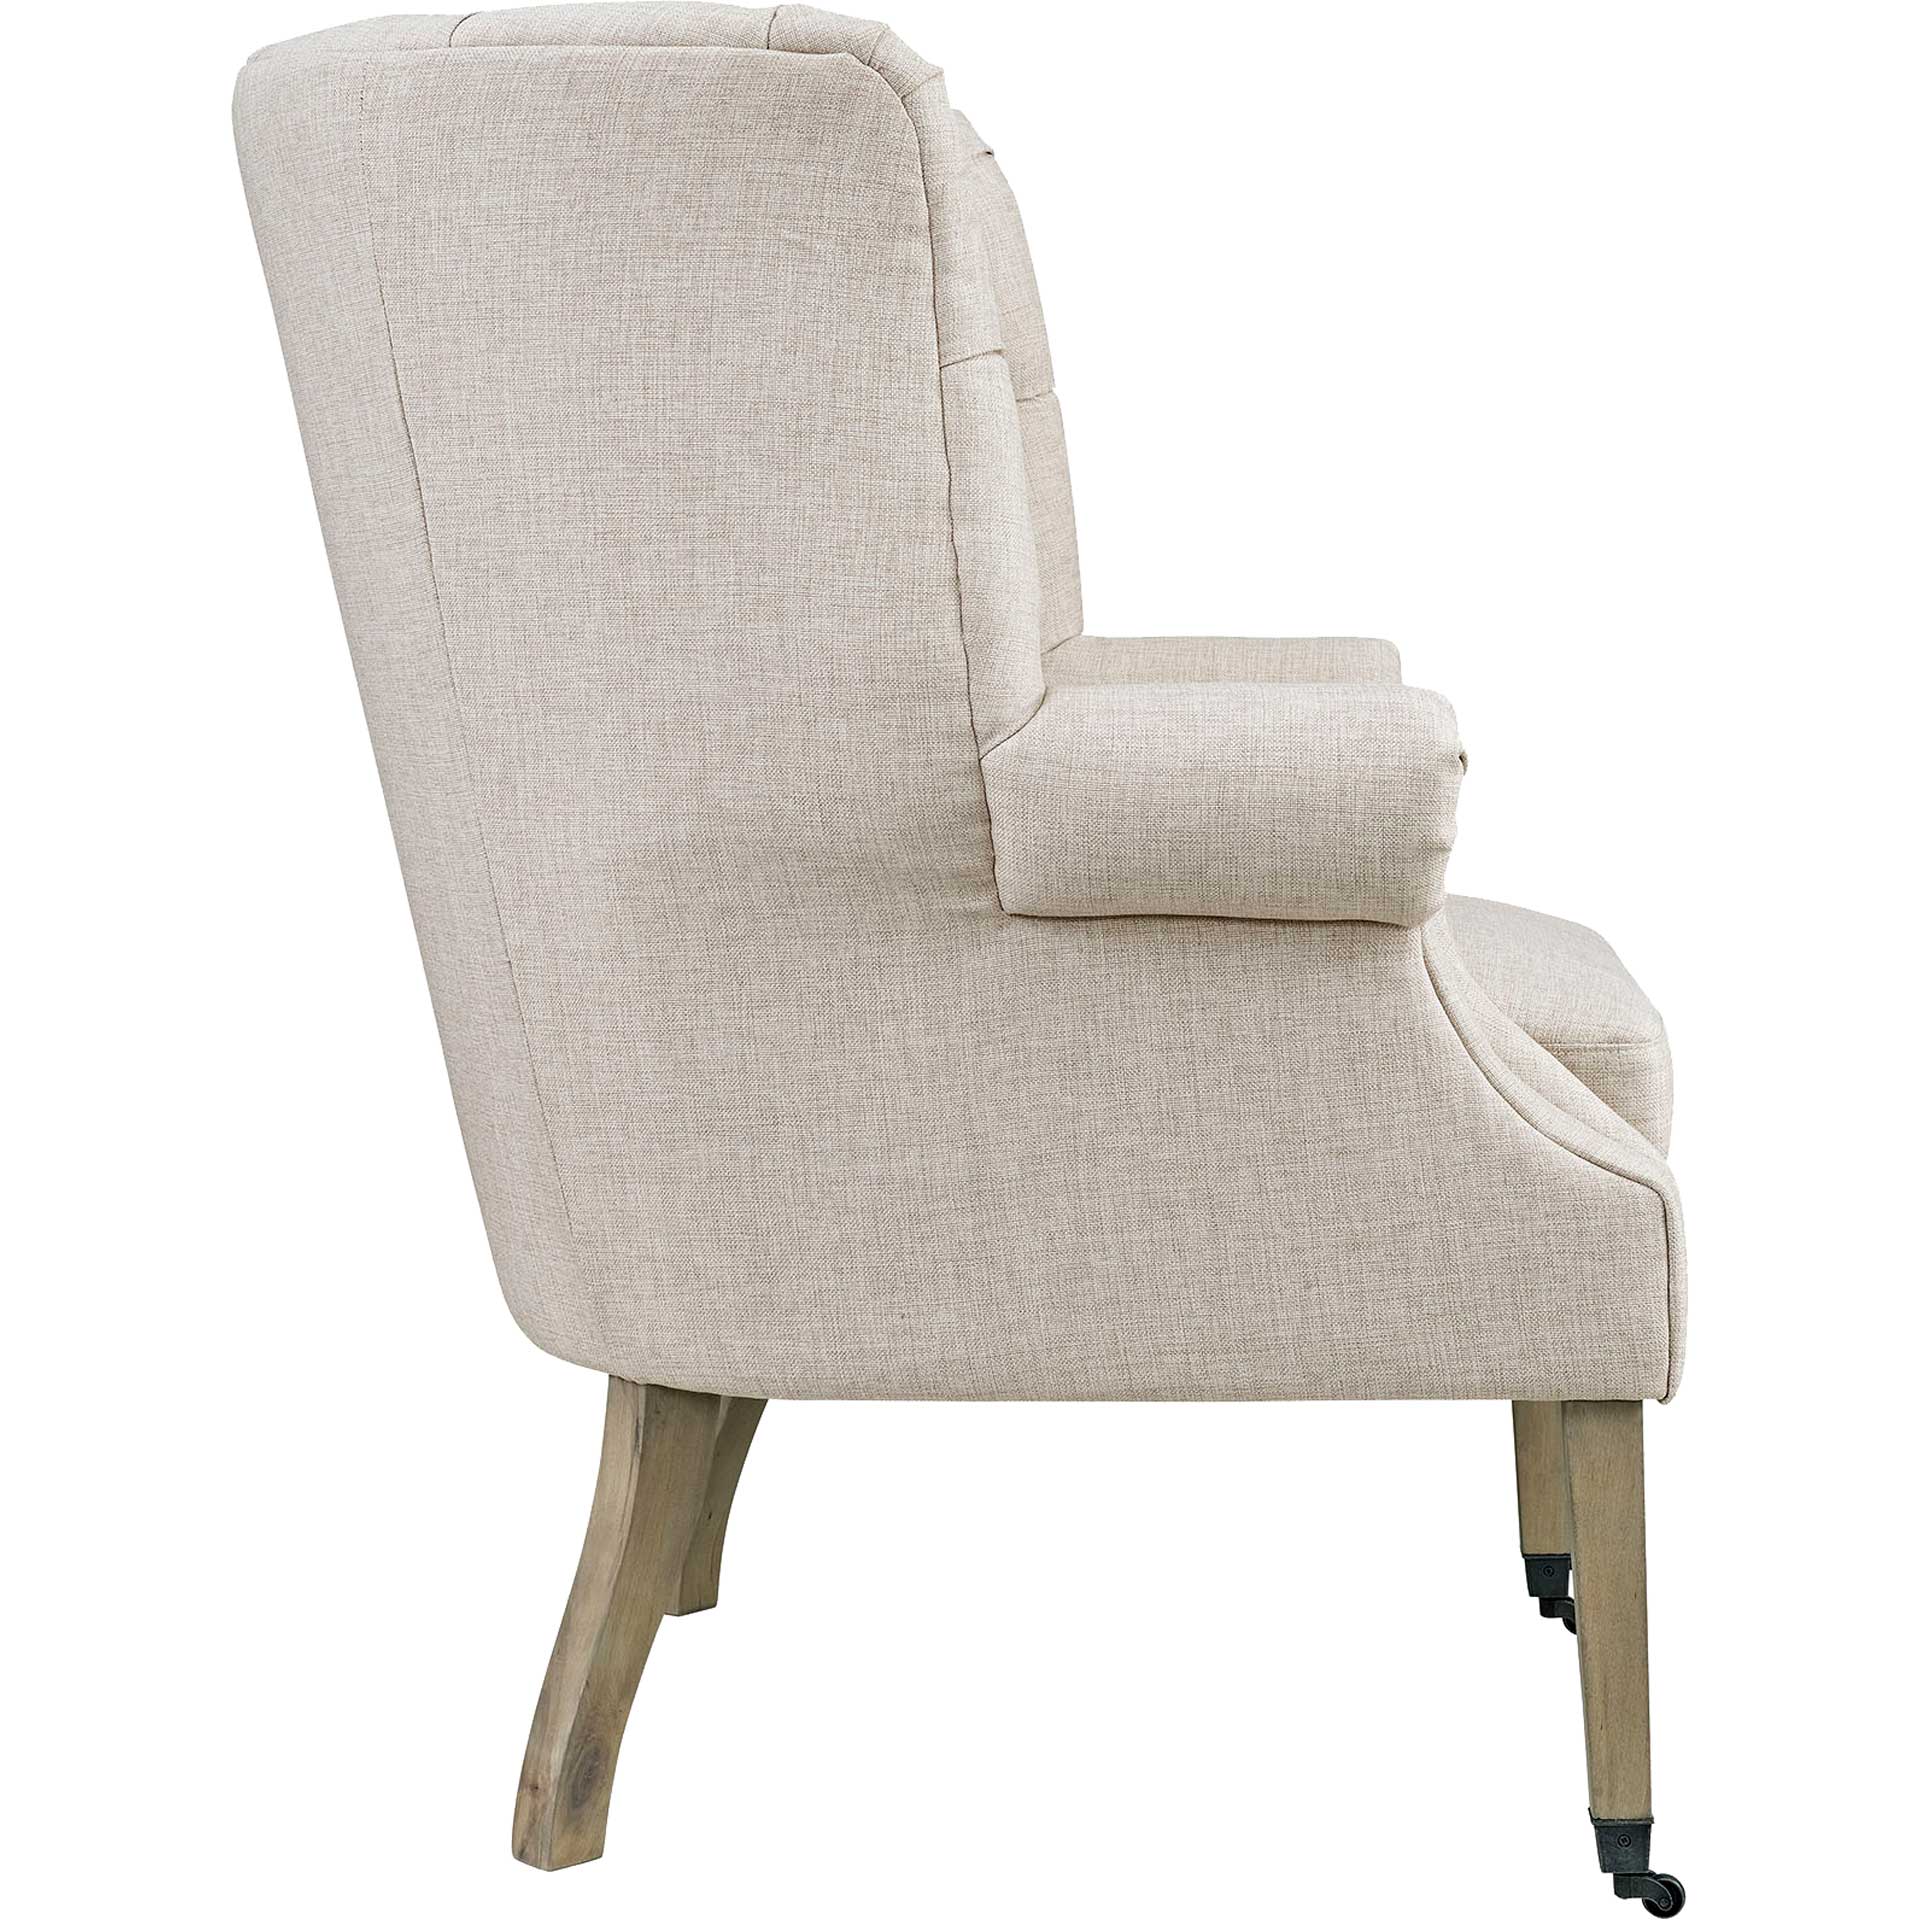 Camron Upholstered Fabric Lounge Chair Sand